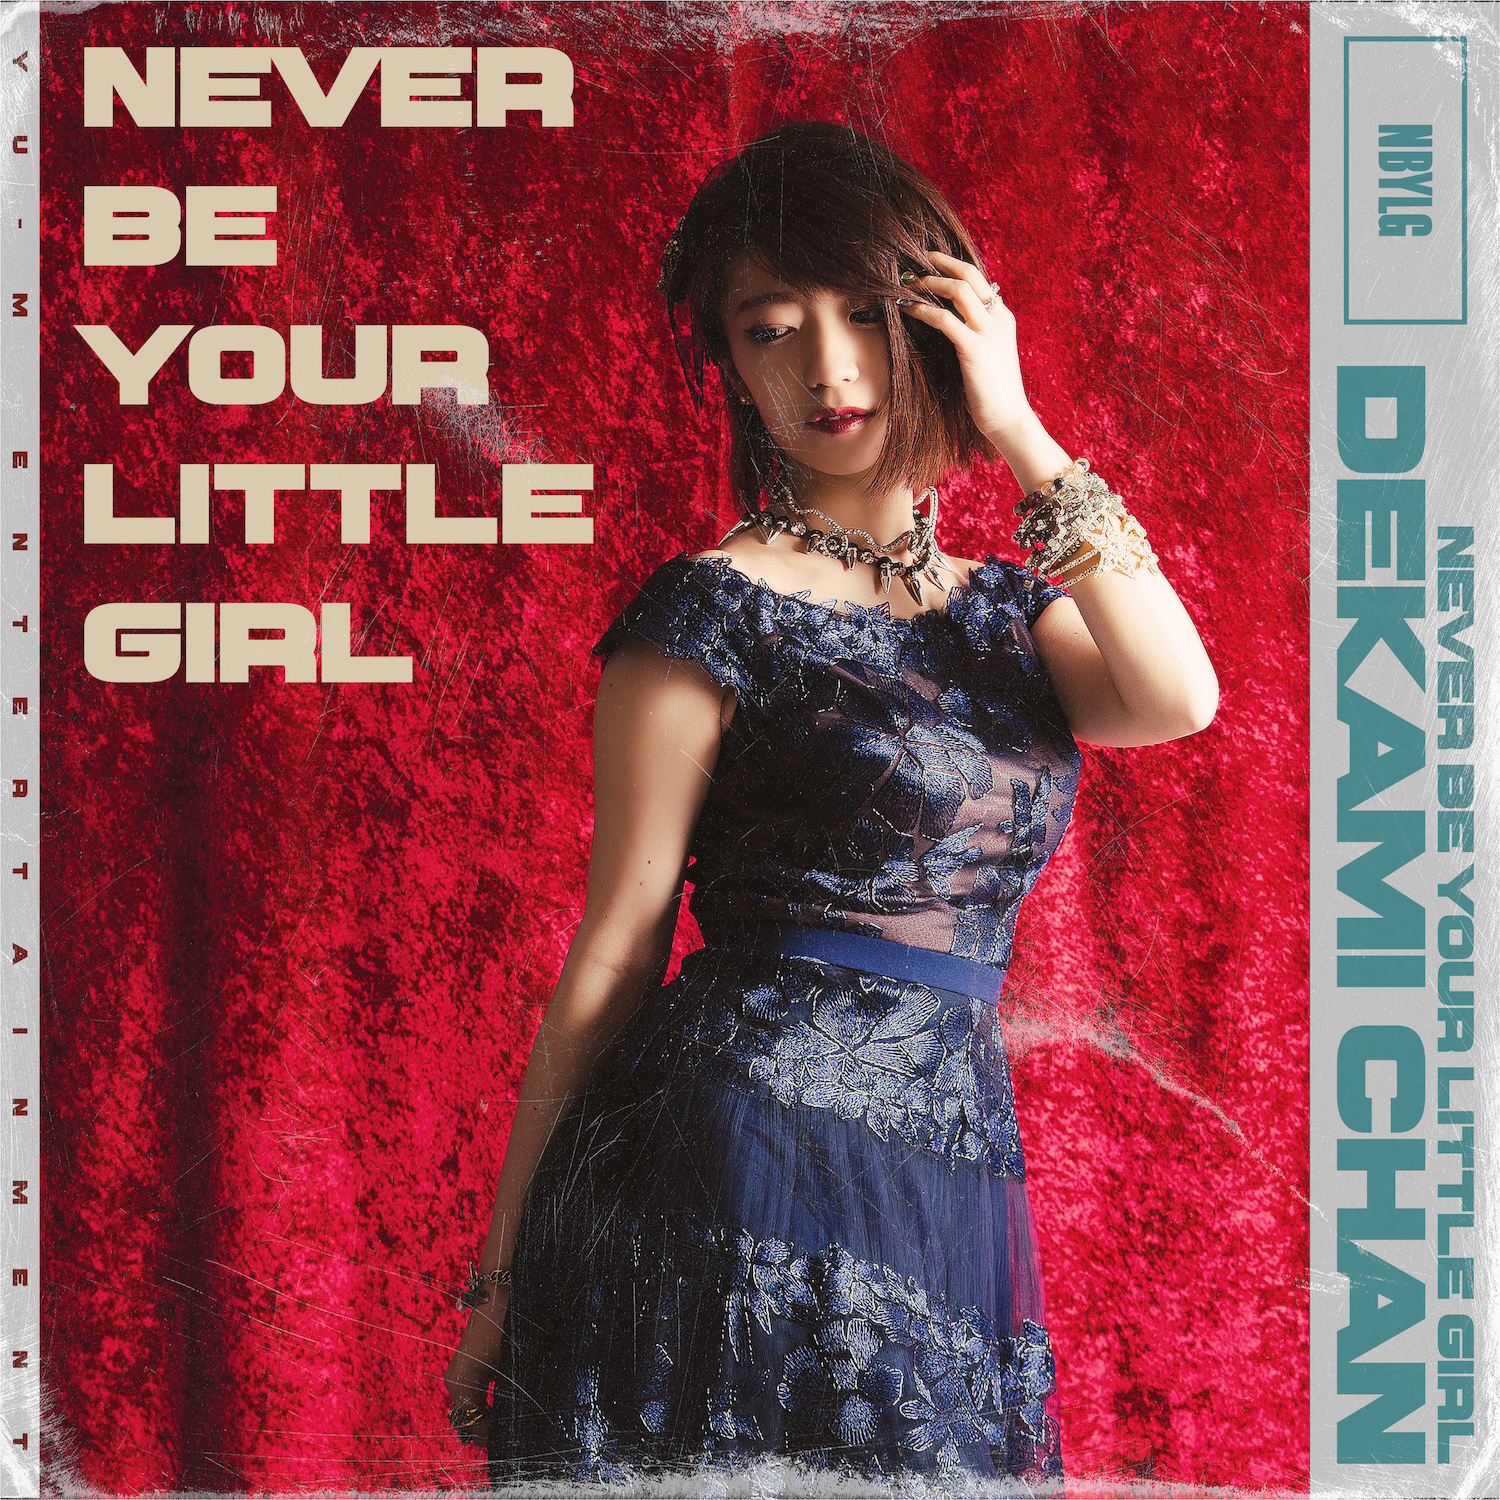 NEVER BE YOUR LITTLE GIRL